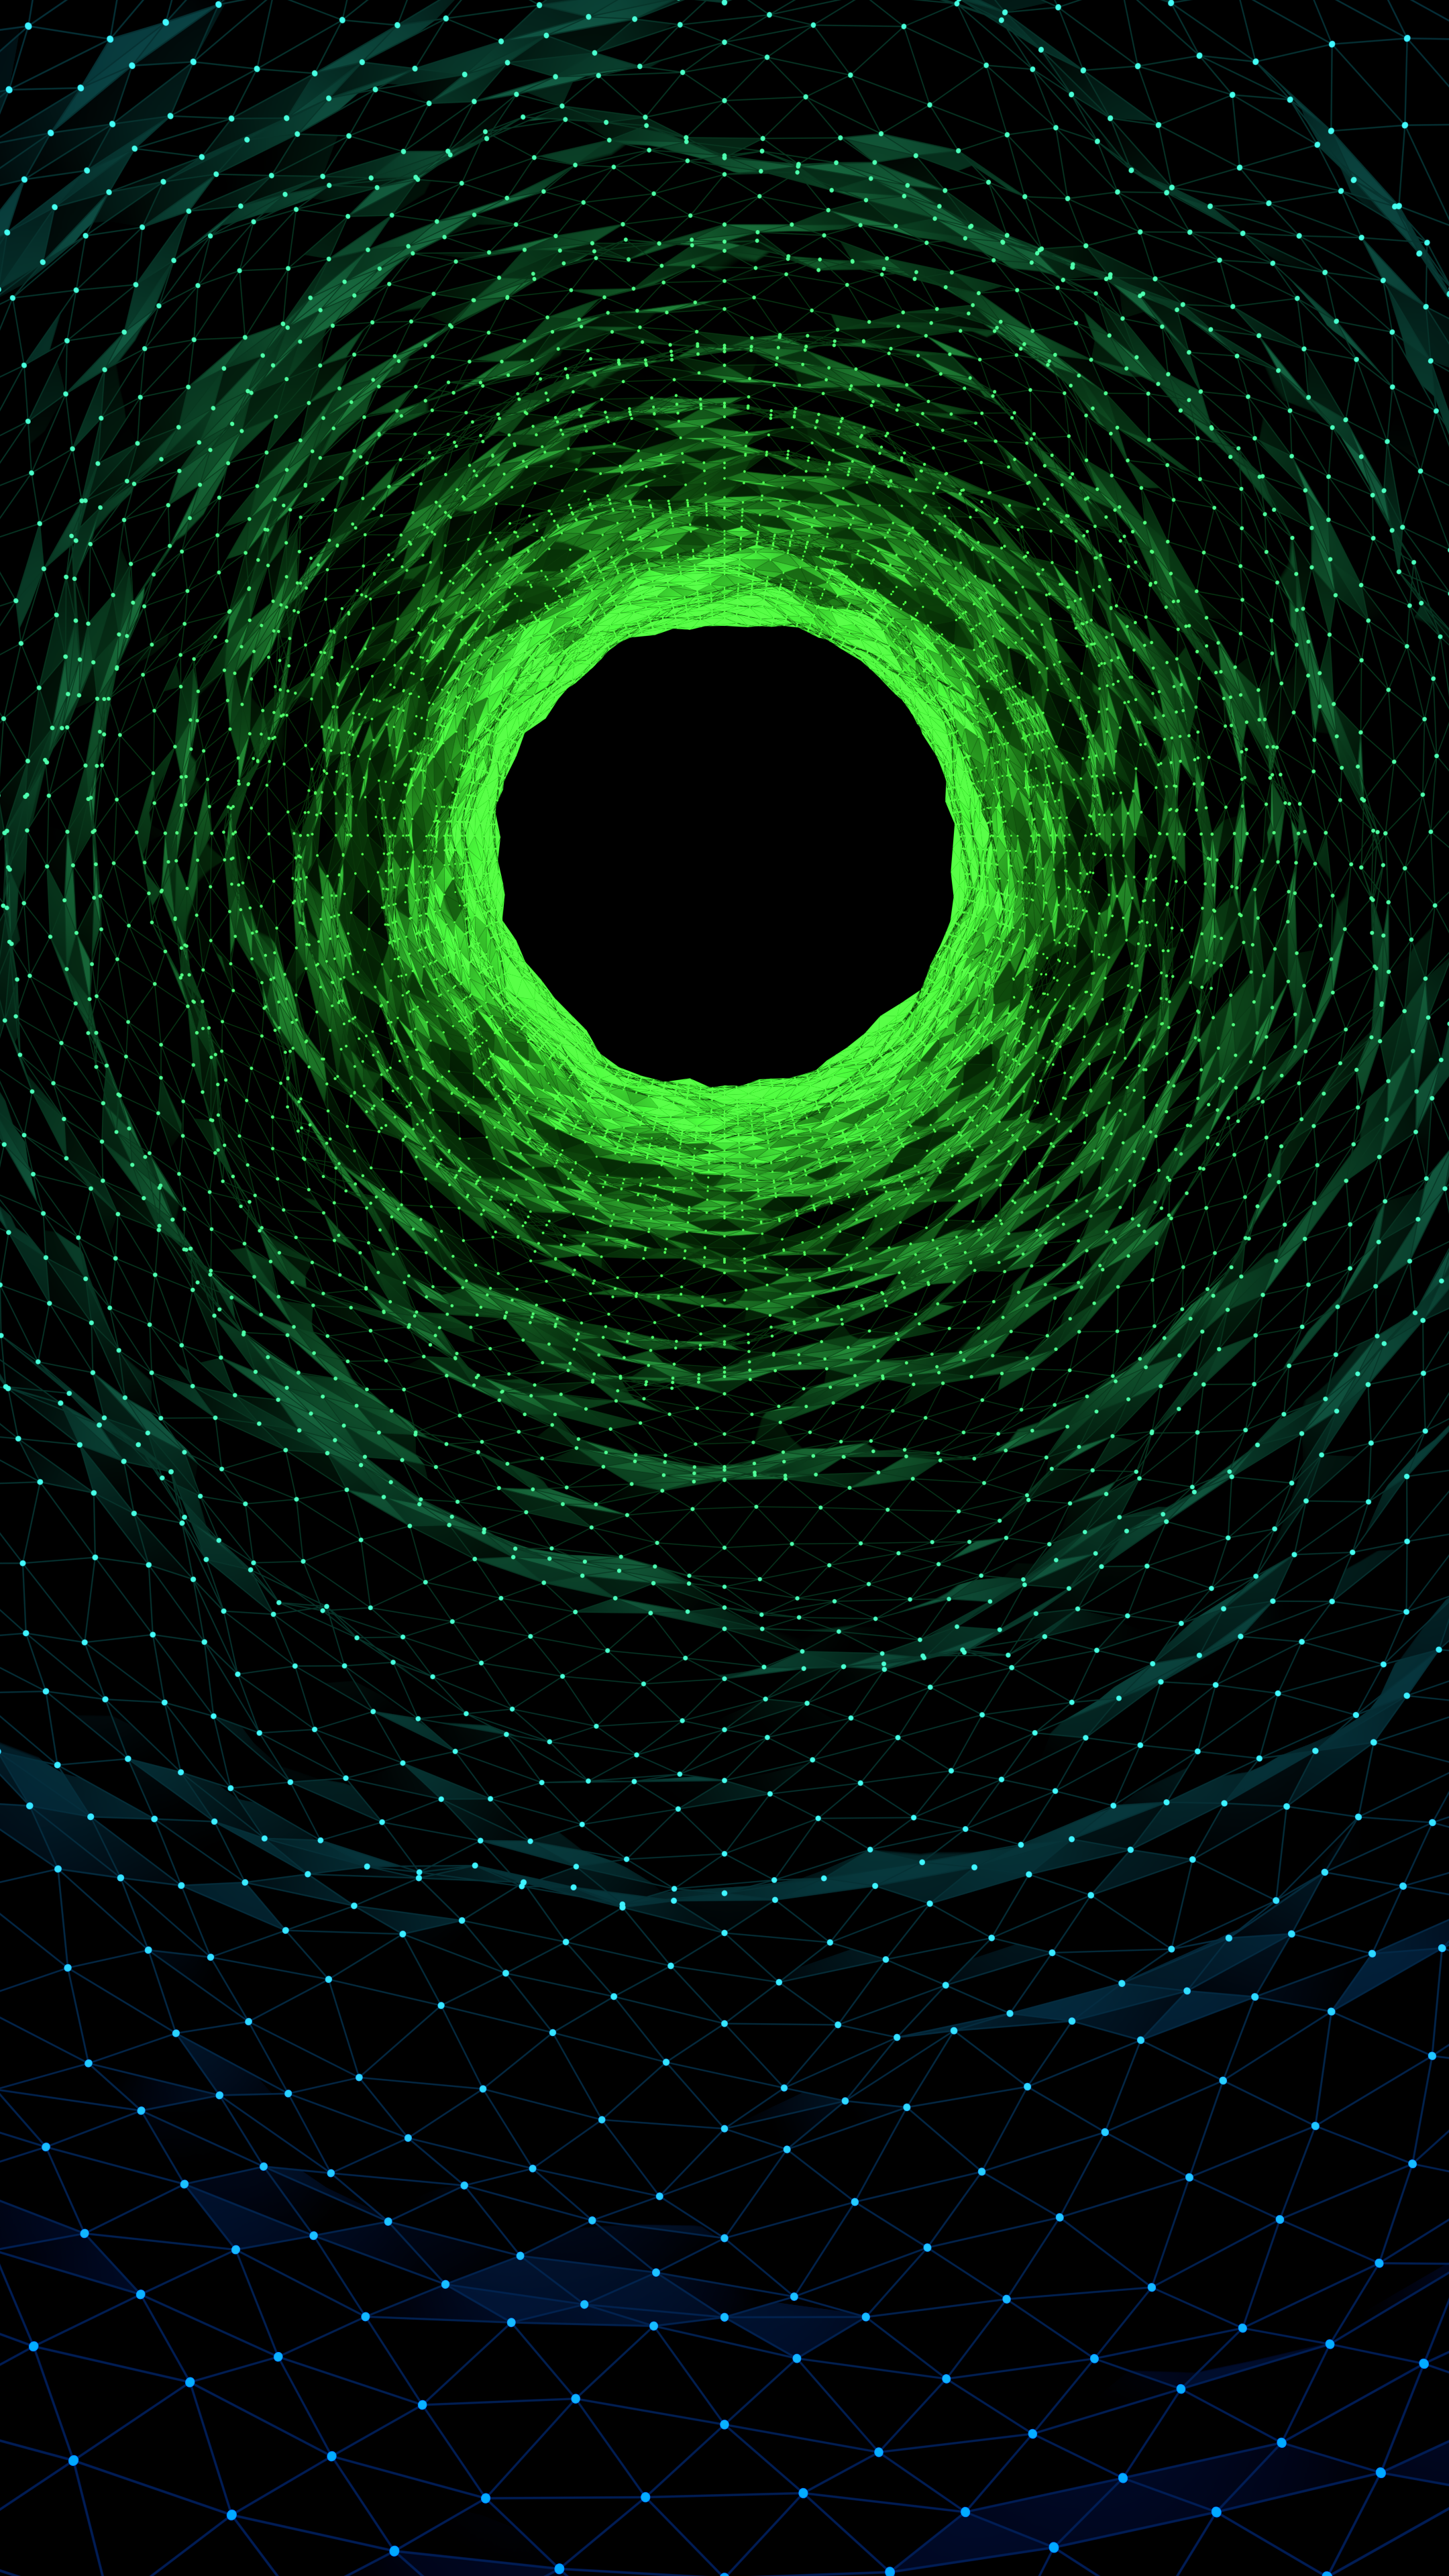 iPhone 11 Pro wallpapers with a green vortex